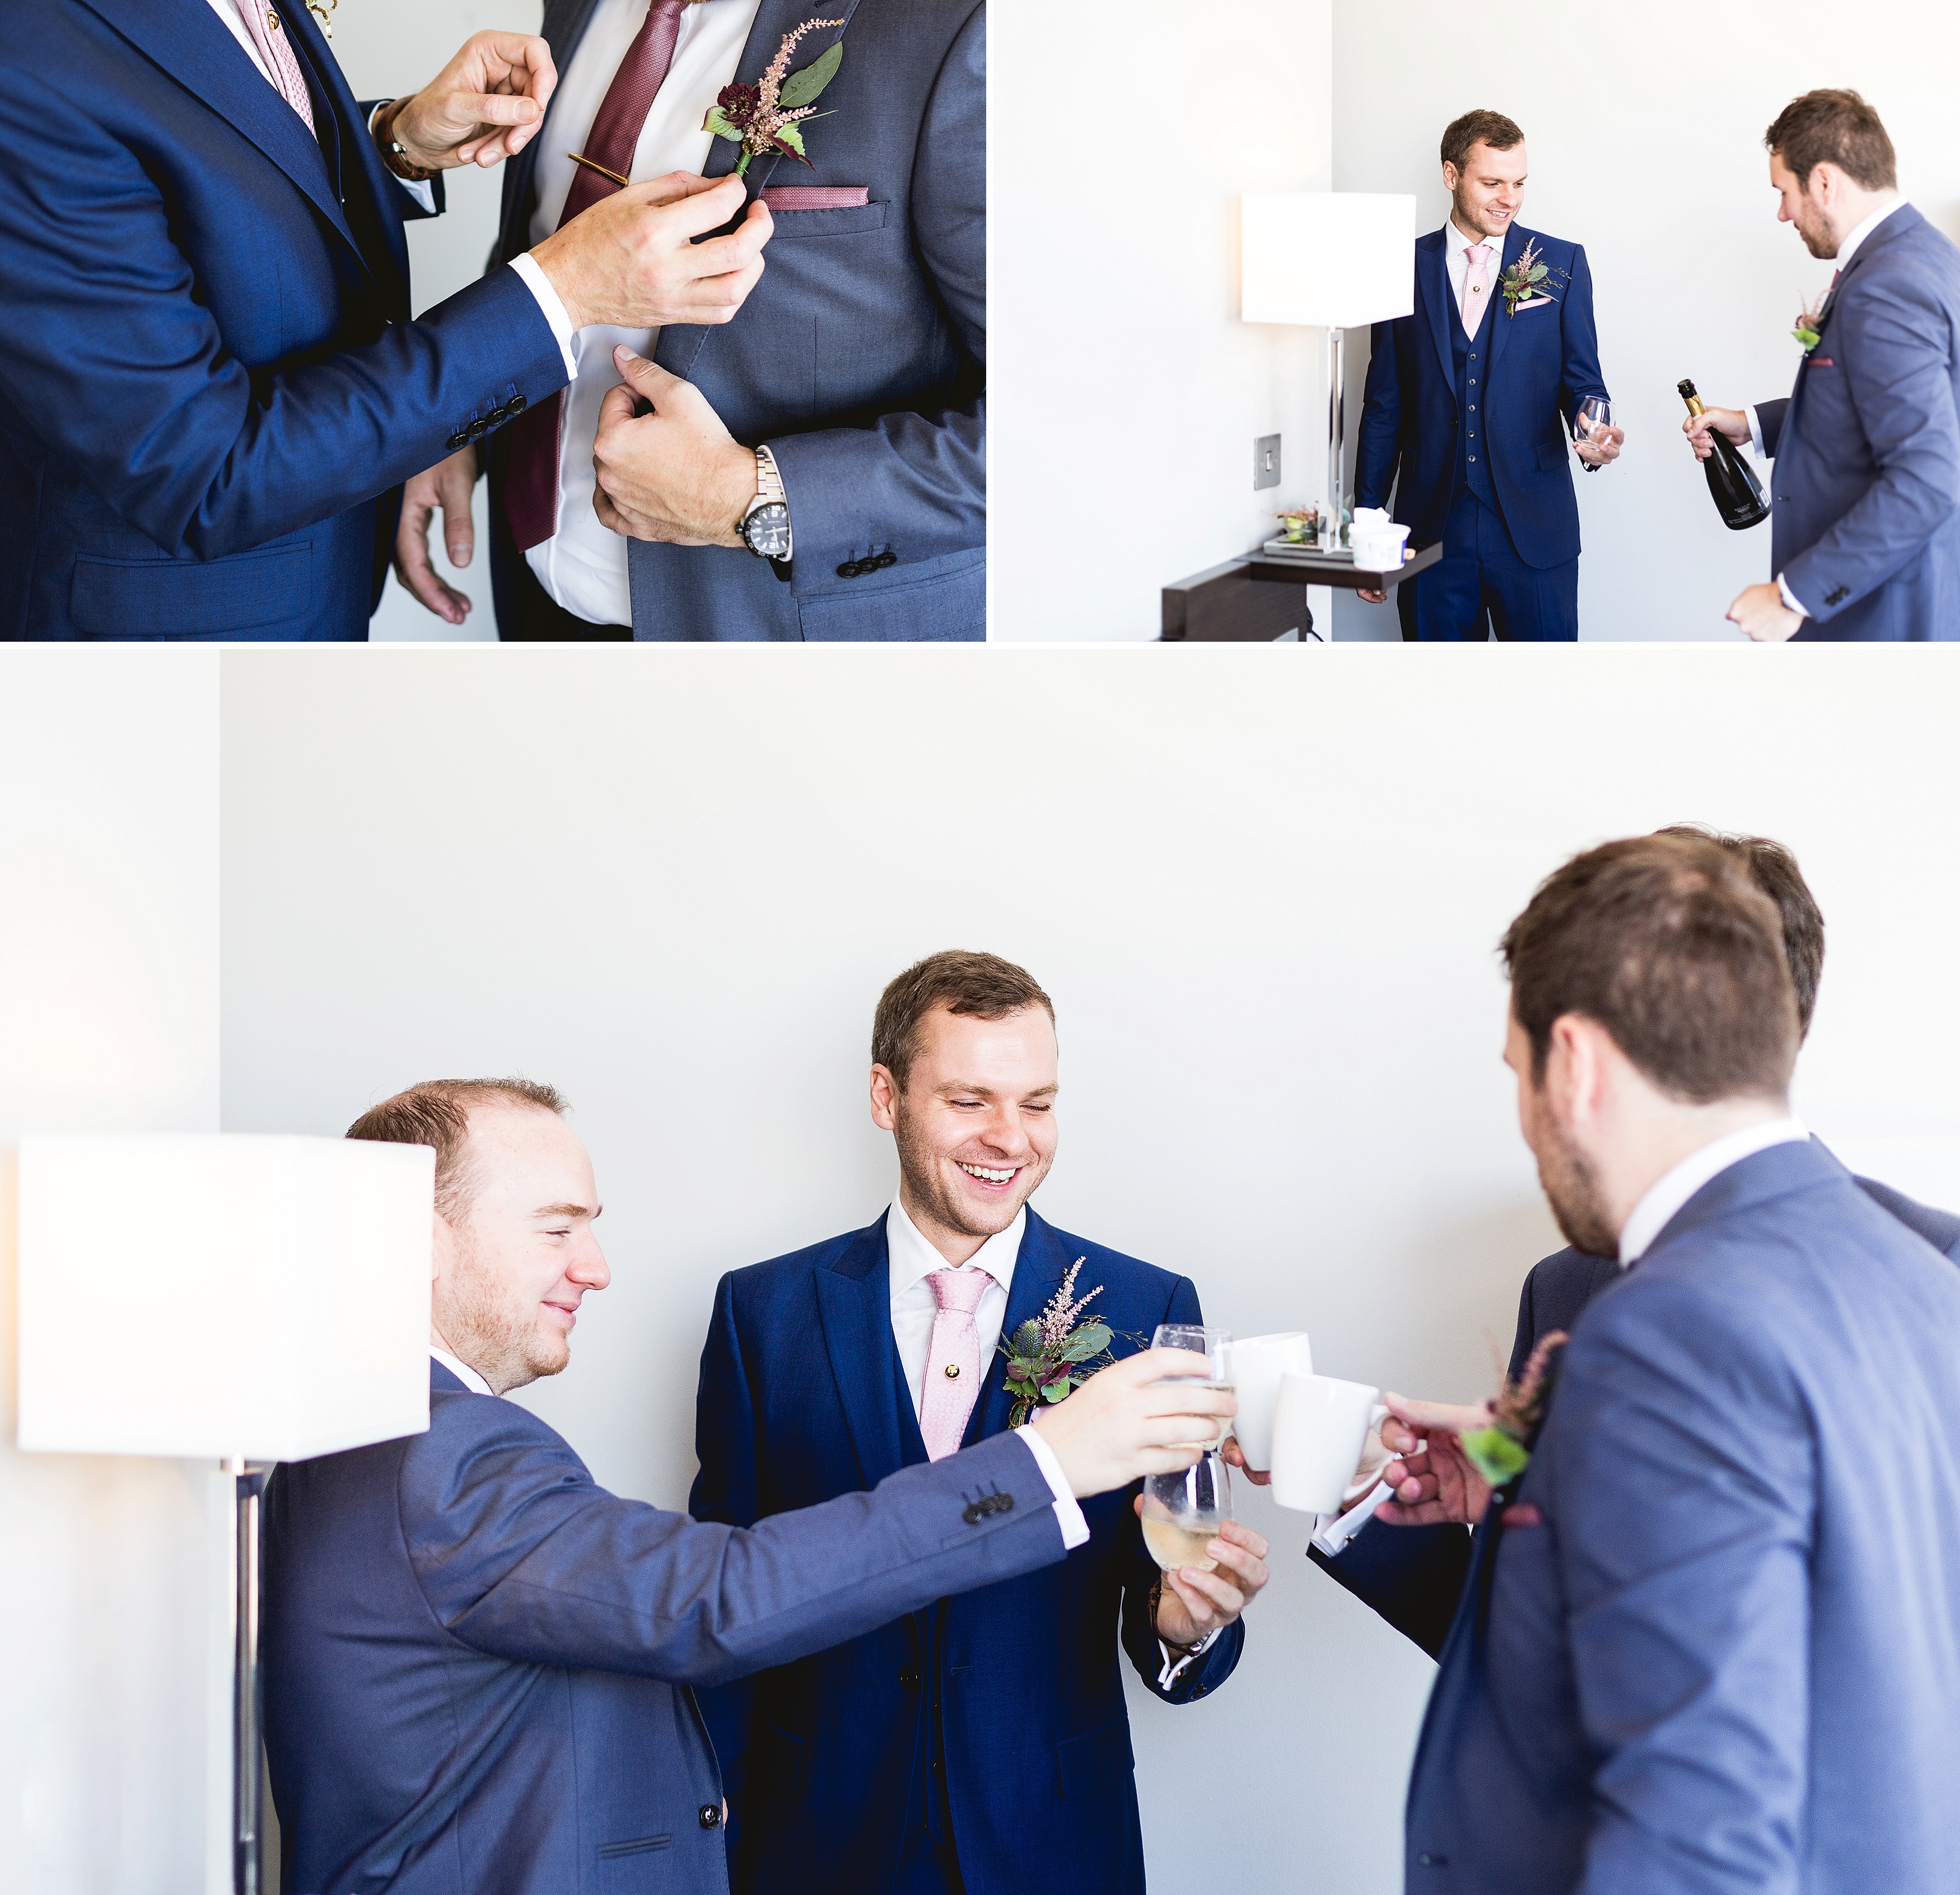 Groom Prep photos in london wedding photography by beatrici photography